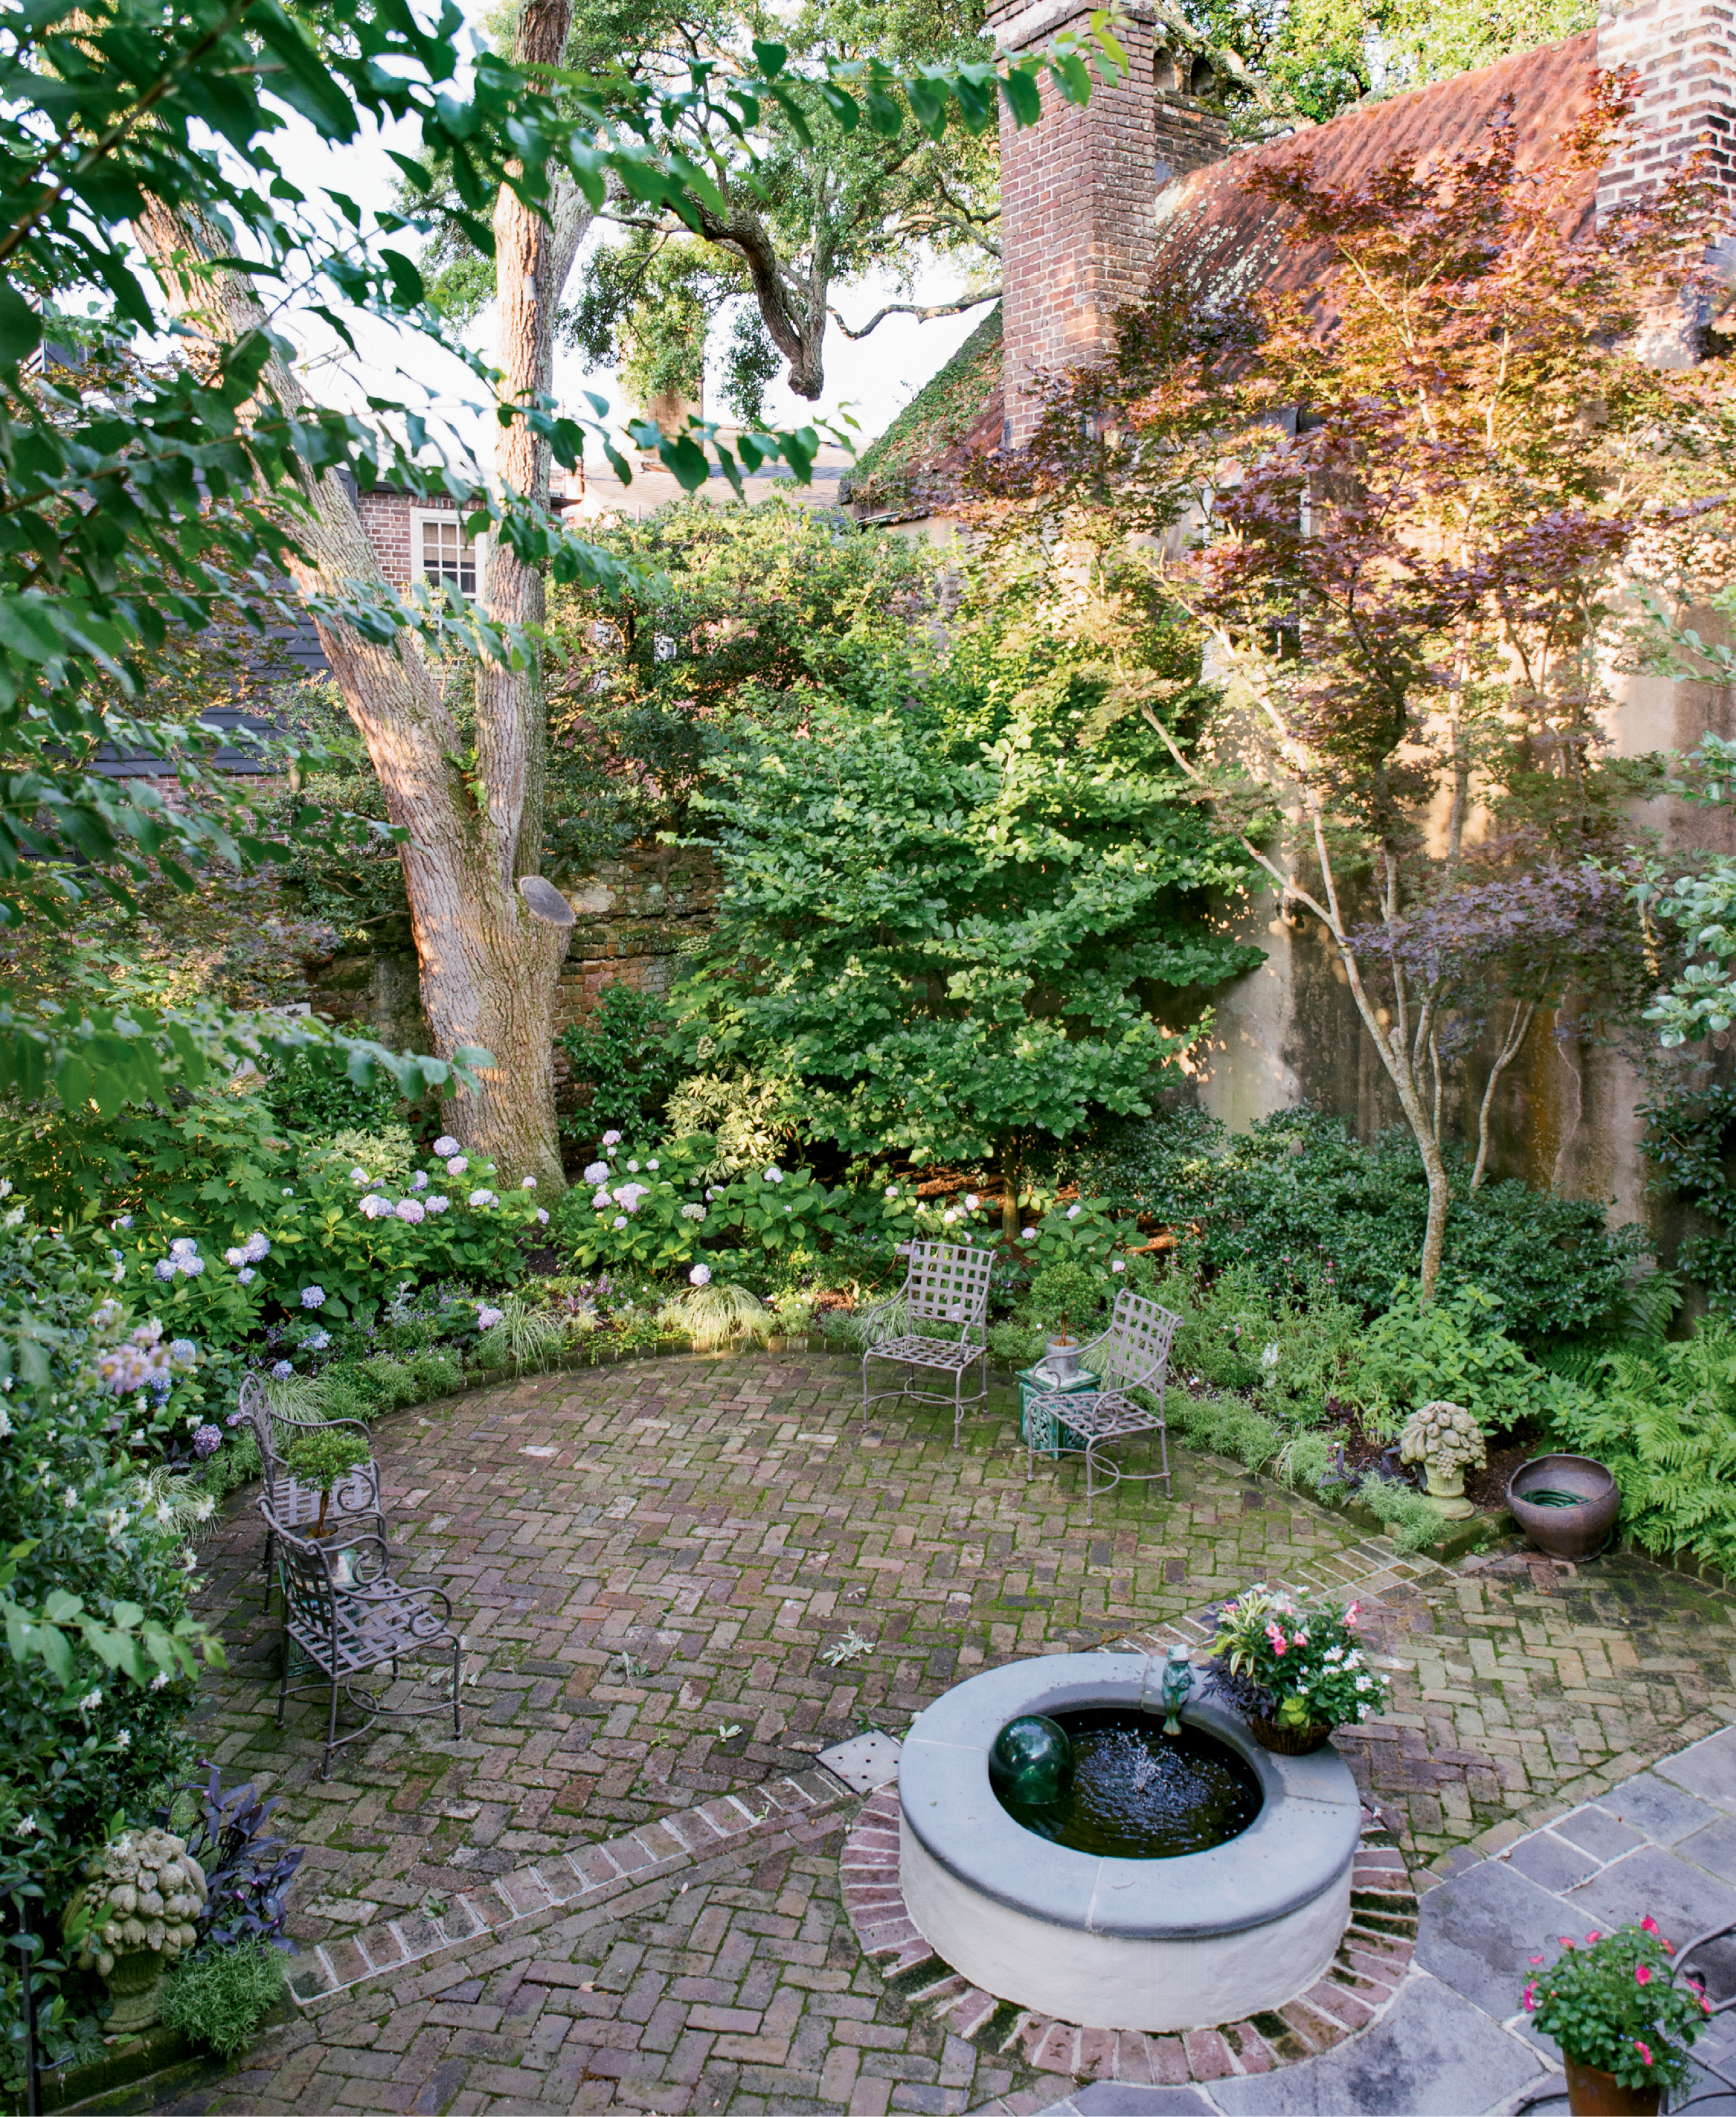 Mature oak, parrotia, Japanese maple, and fringe trees lend privacy and shade to the courtyard garden.